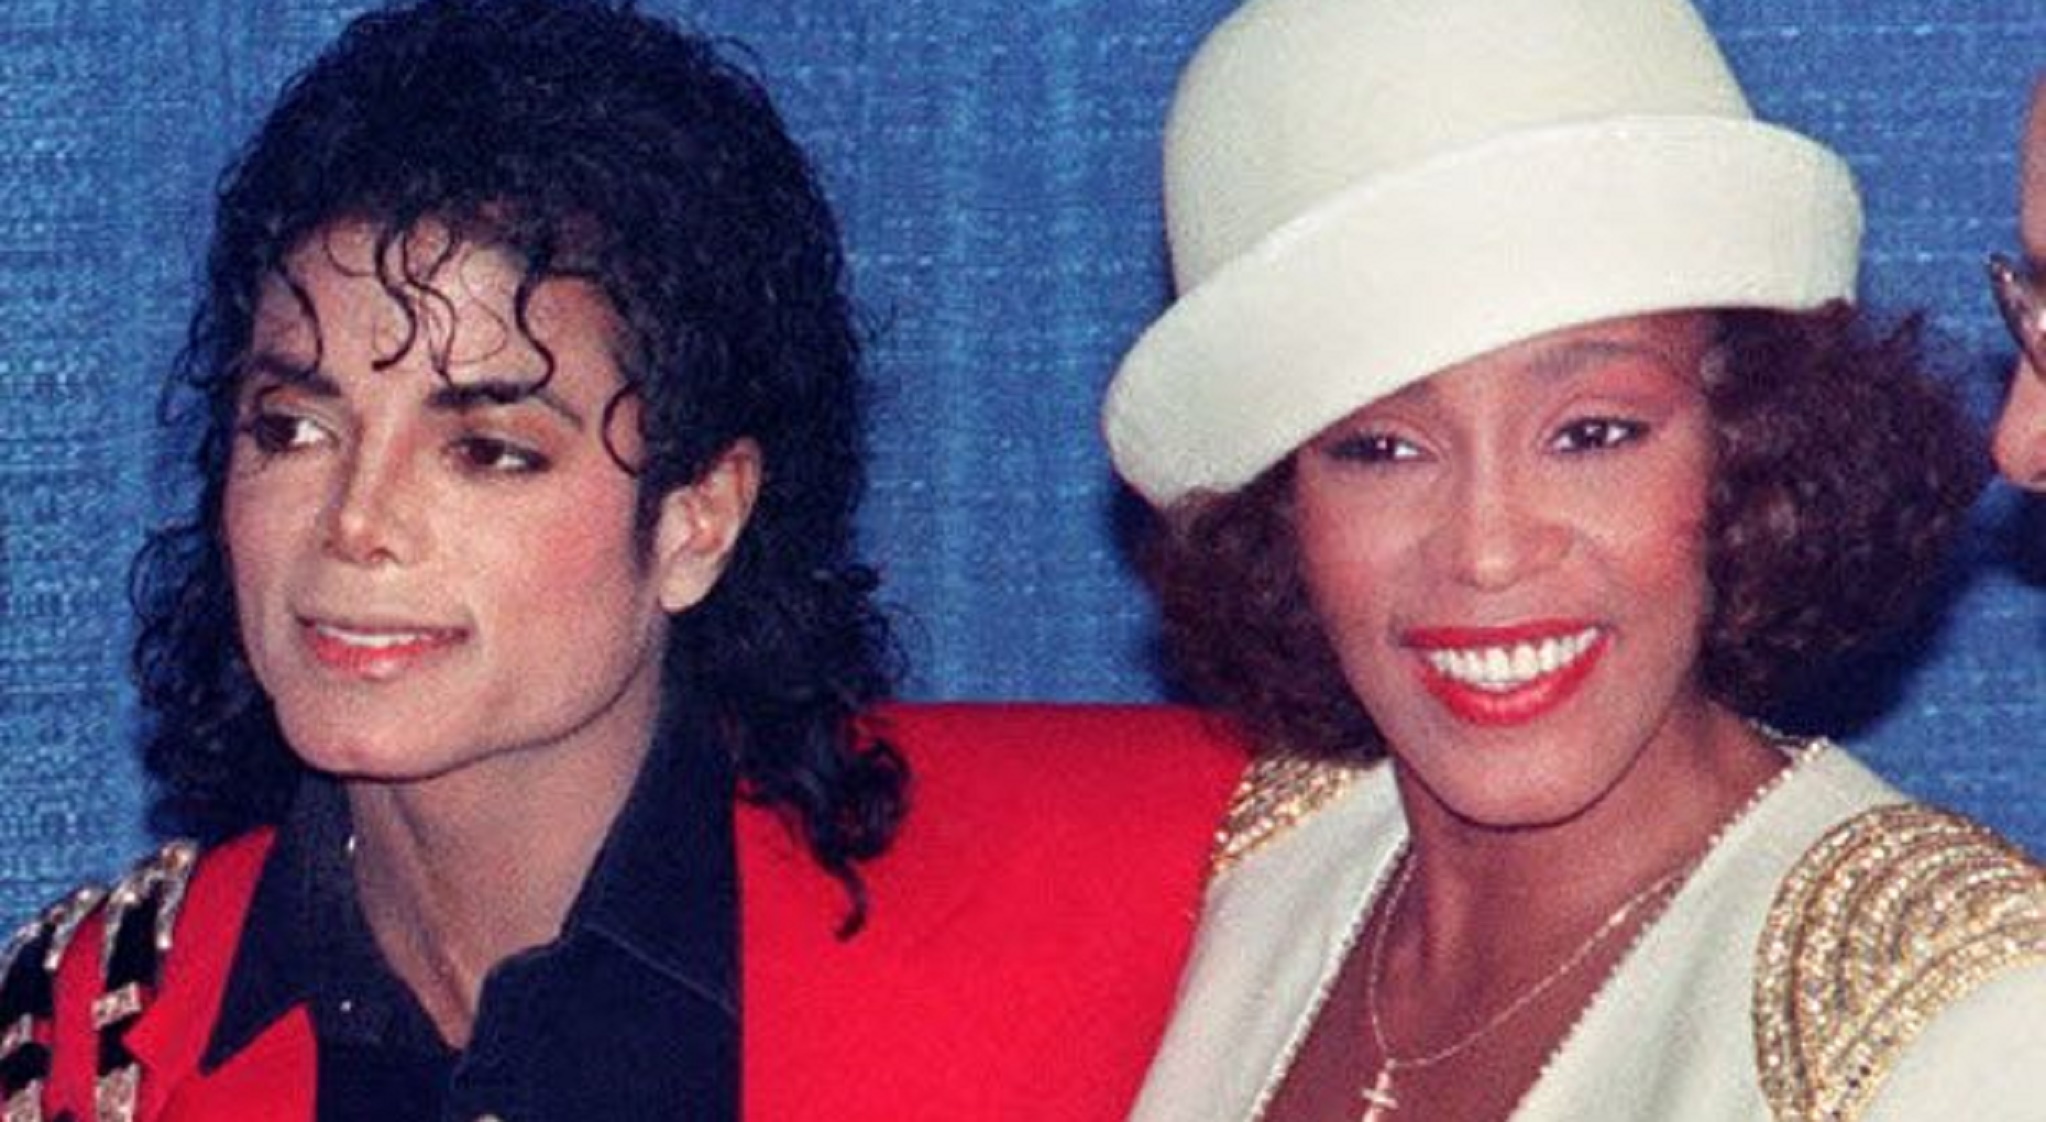 Michael Jackson Wanted To Marry Whitney Houston? This Video Claims…